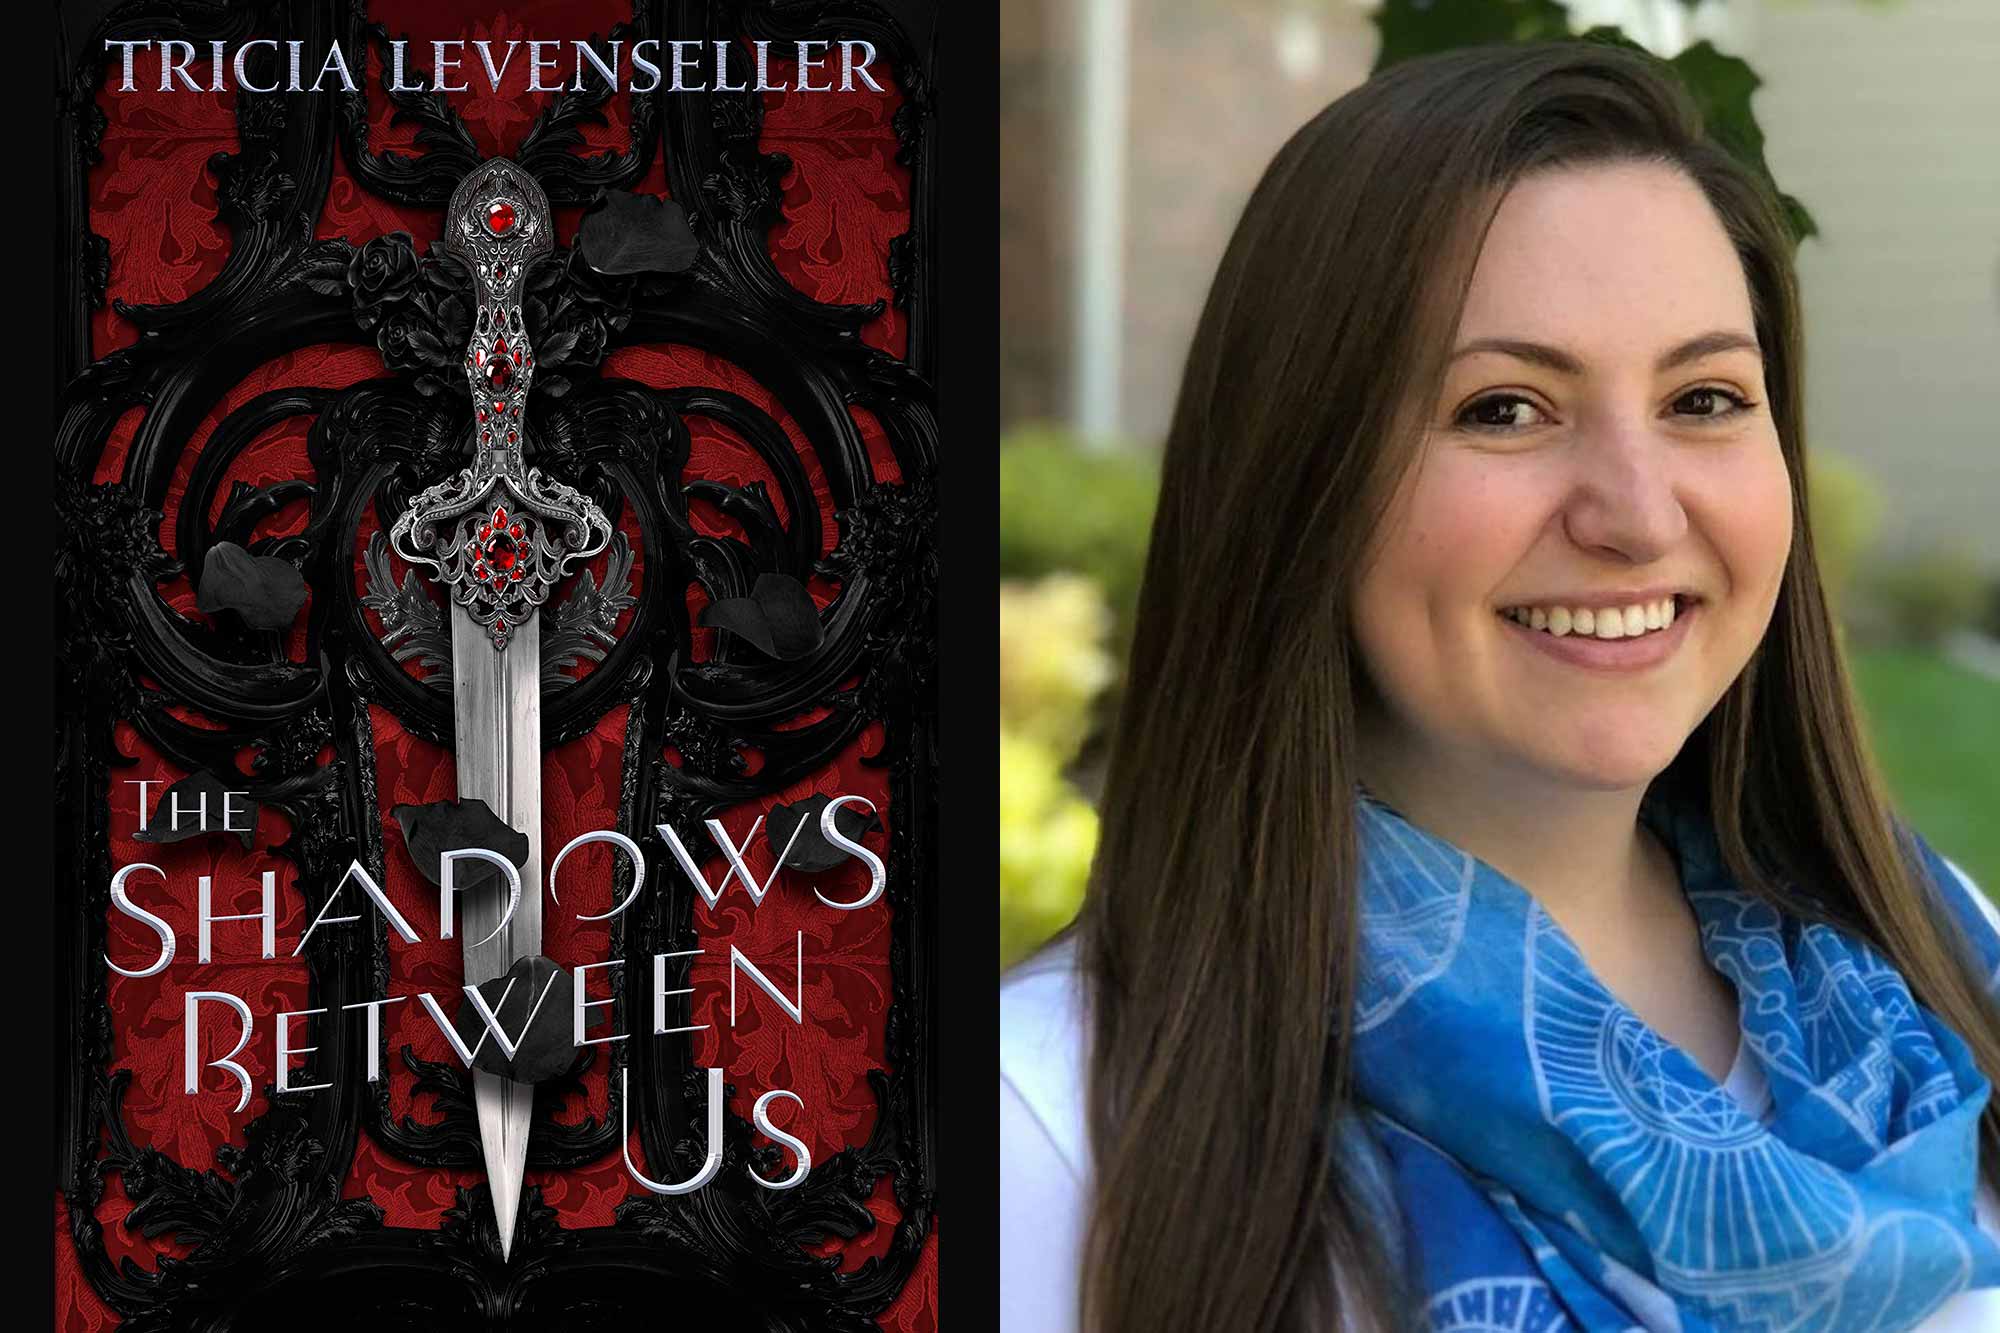 Tricia Levenseller on The Shadows Between Us